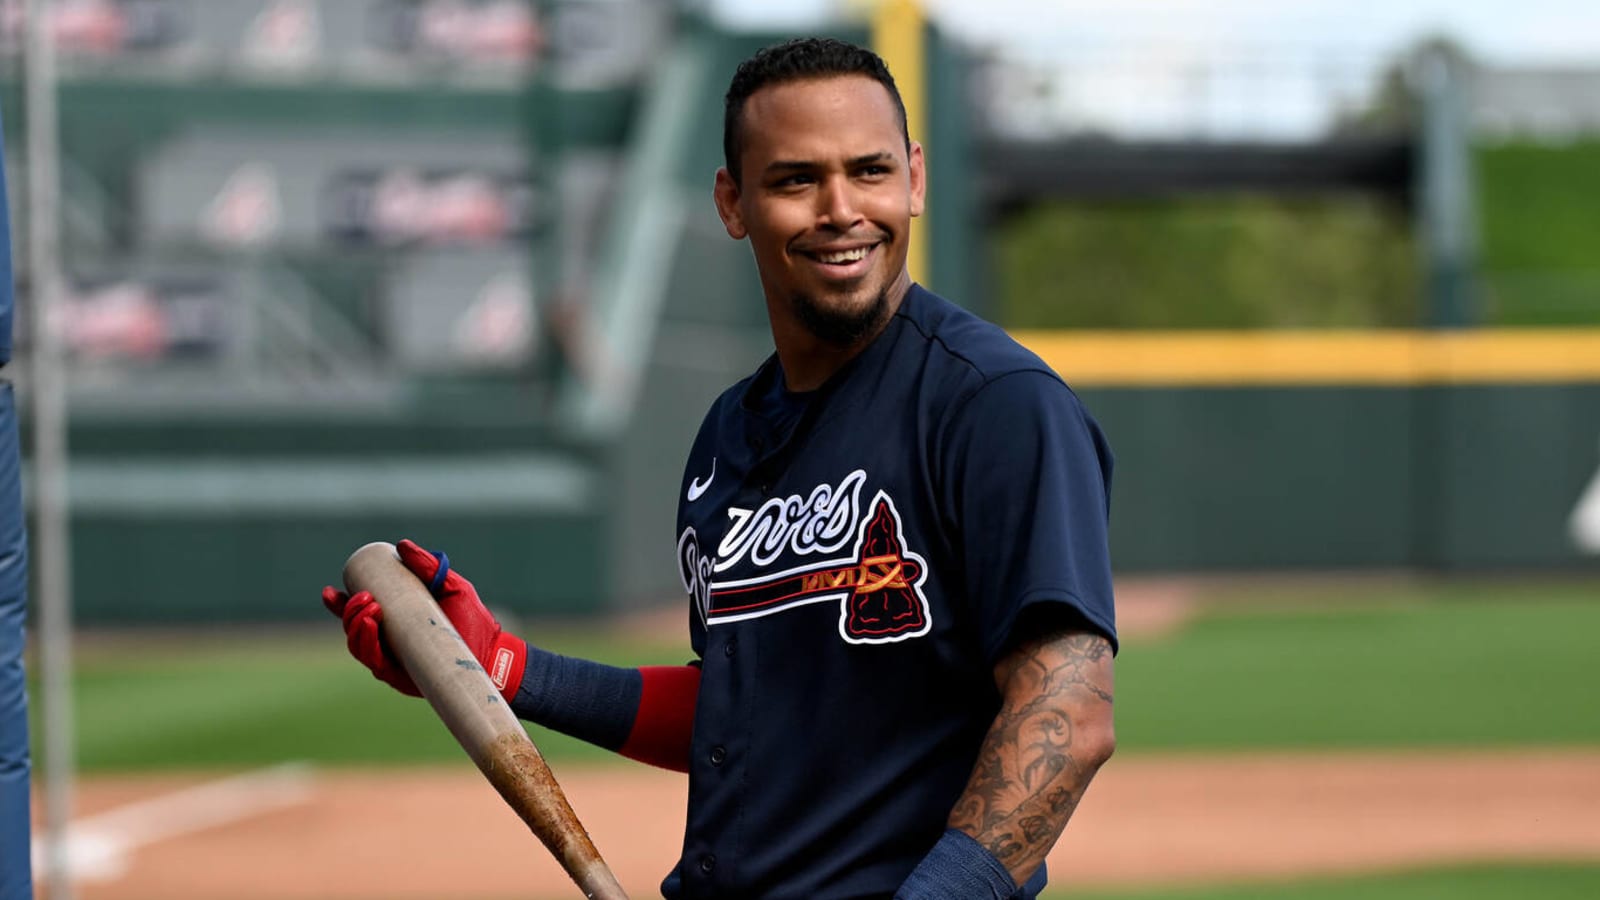 Braves extend shortstop with new three-year deal